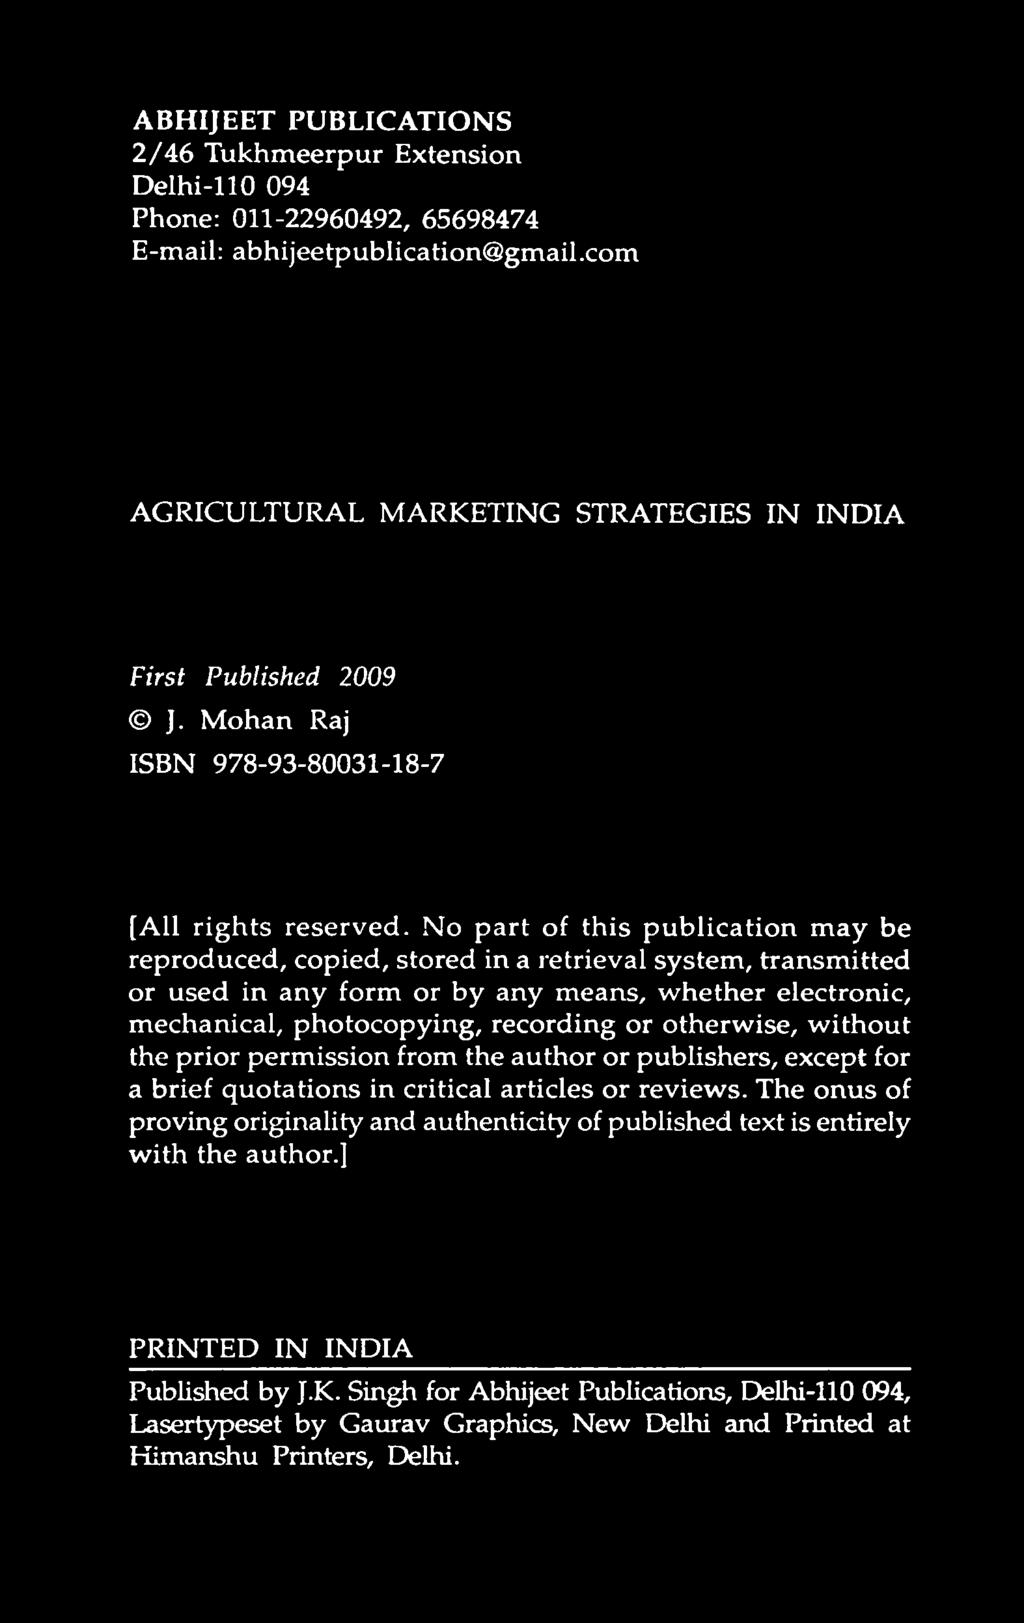 ABHIJEET PUBLICATIONS 2 /4 6 Tukhmeerpur Extension Delhi-110 094 Phone: 011-22960492, 65698474 E-mail: abhijeetpublication@gmail.com AGRICULTURAL MARKETING STRATEGIES IN INDIA First Published 2009 J.